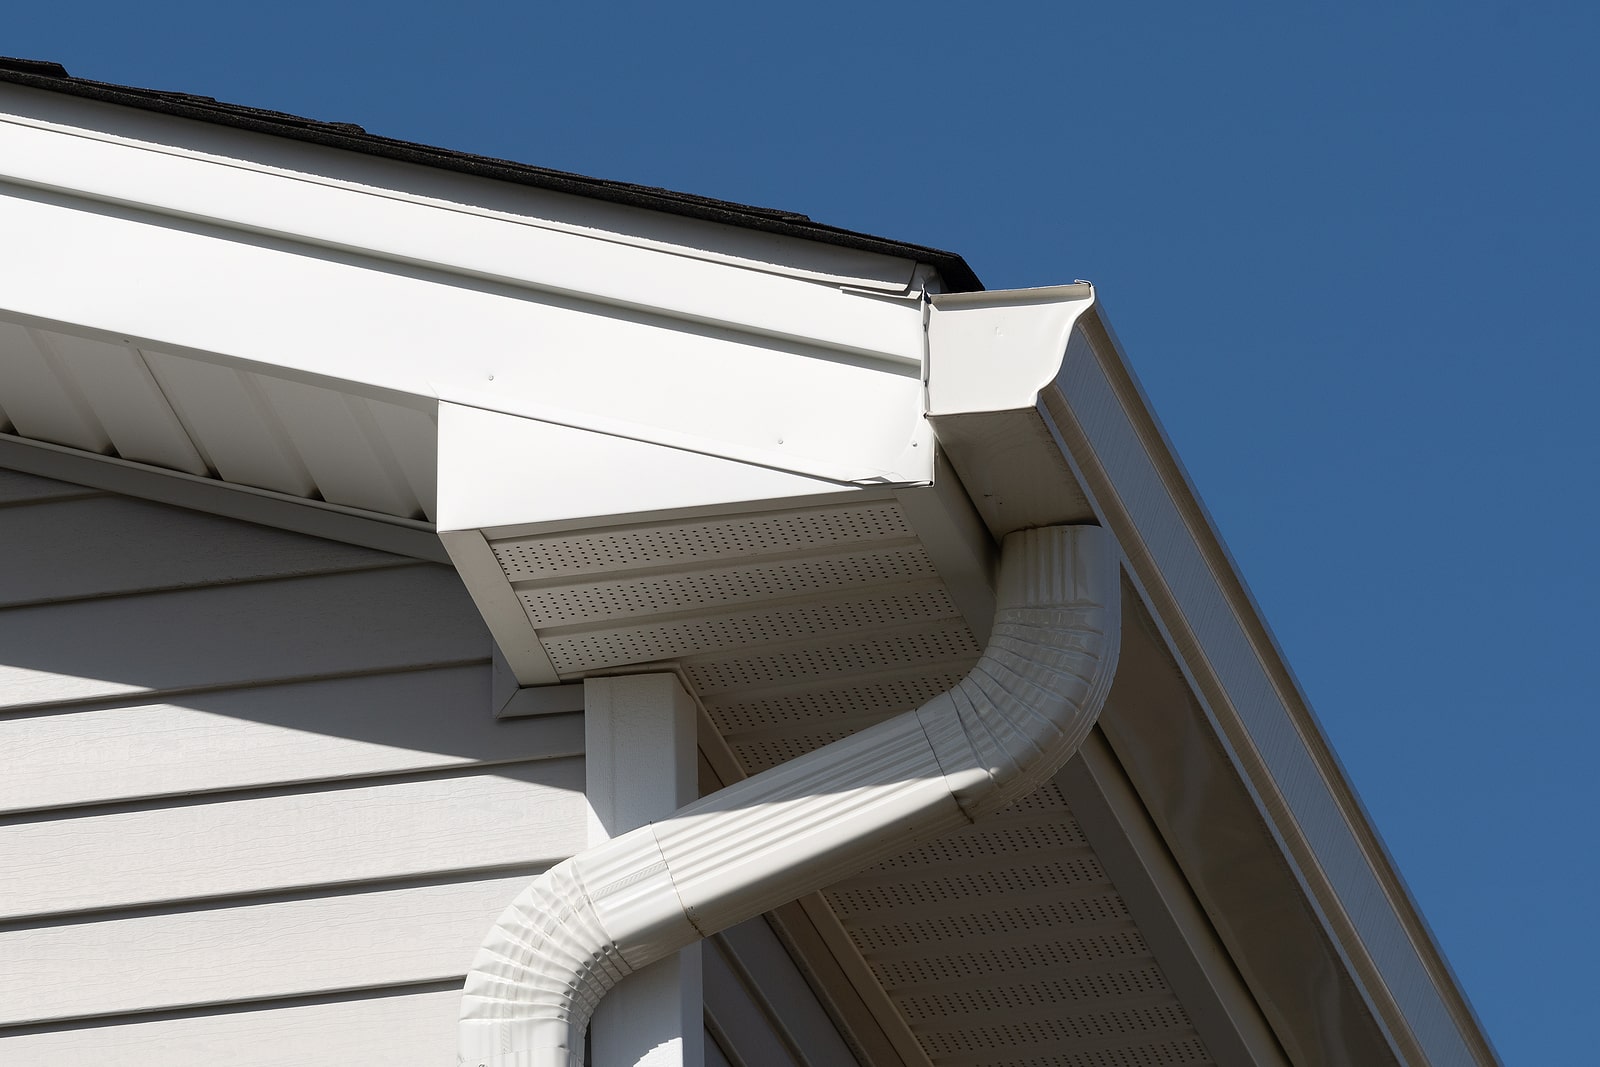 Siding and Gutter Replacement in Rutledge, GA